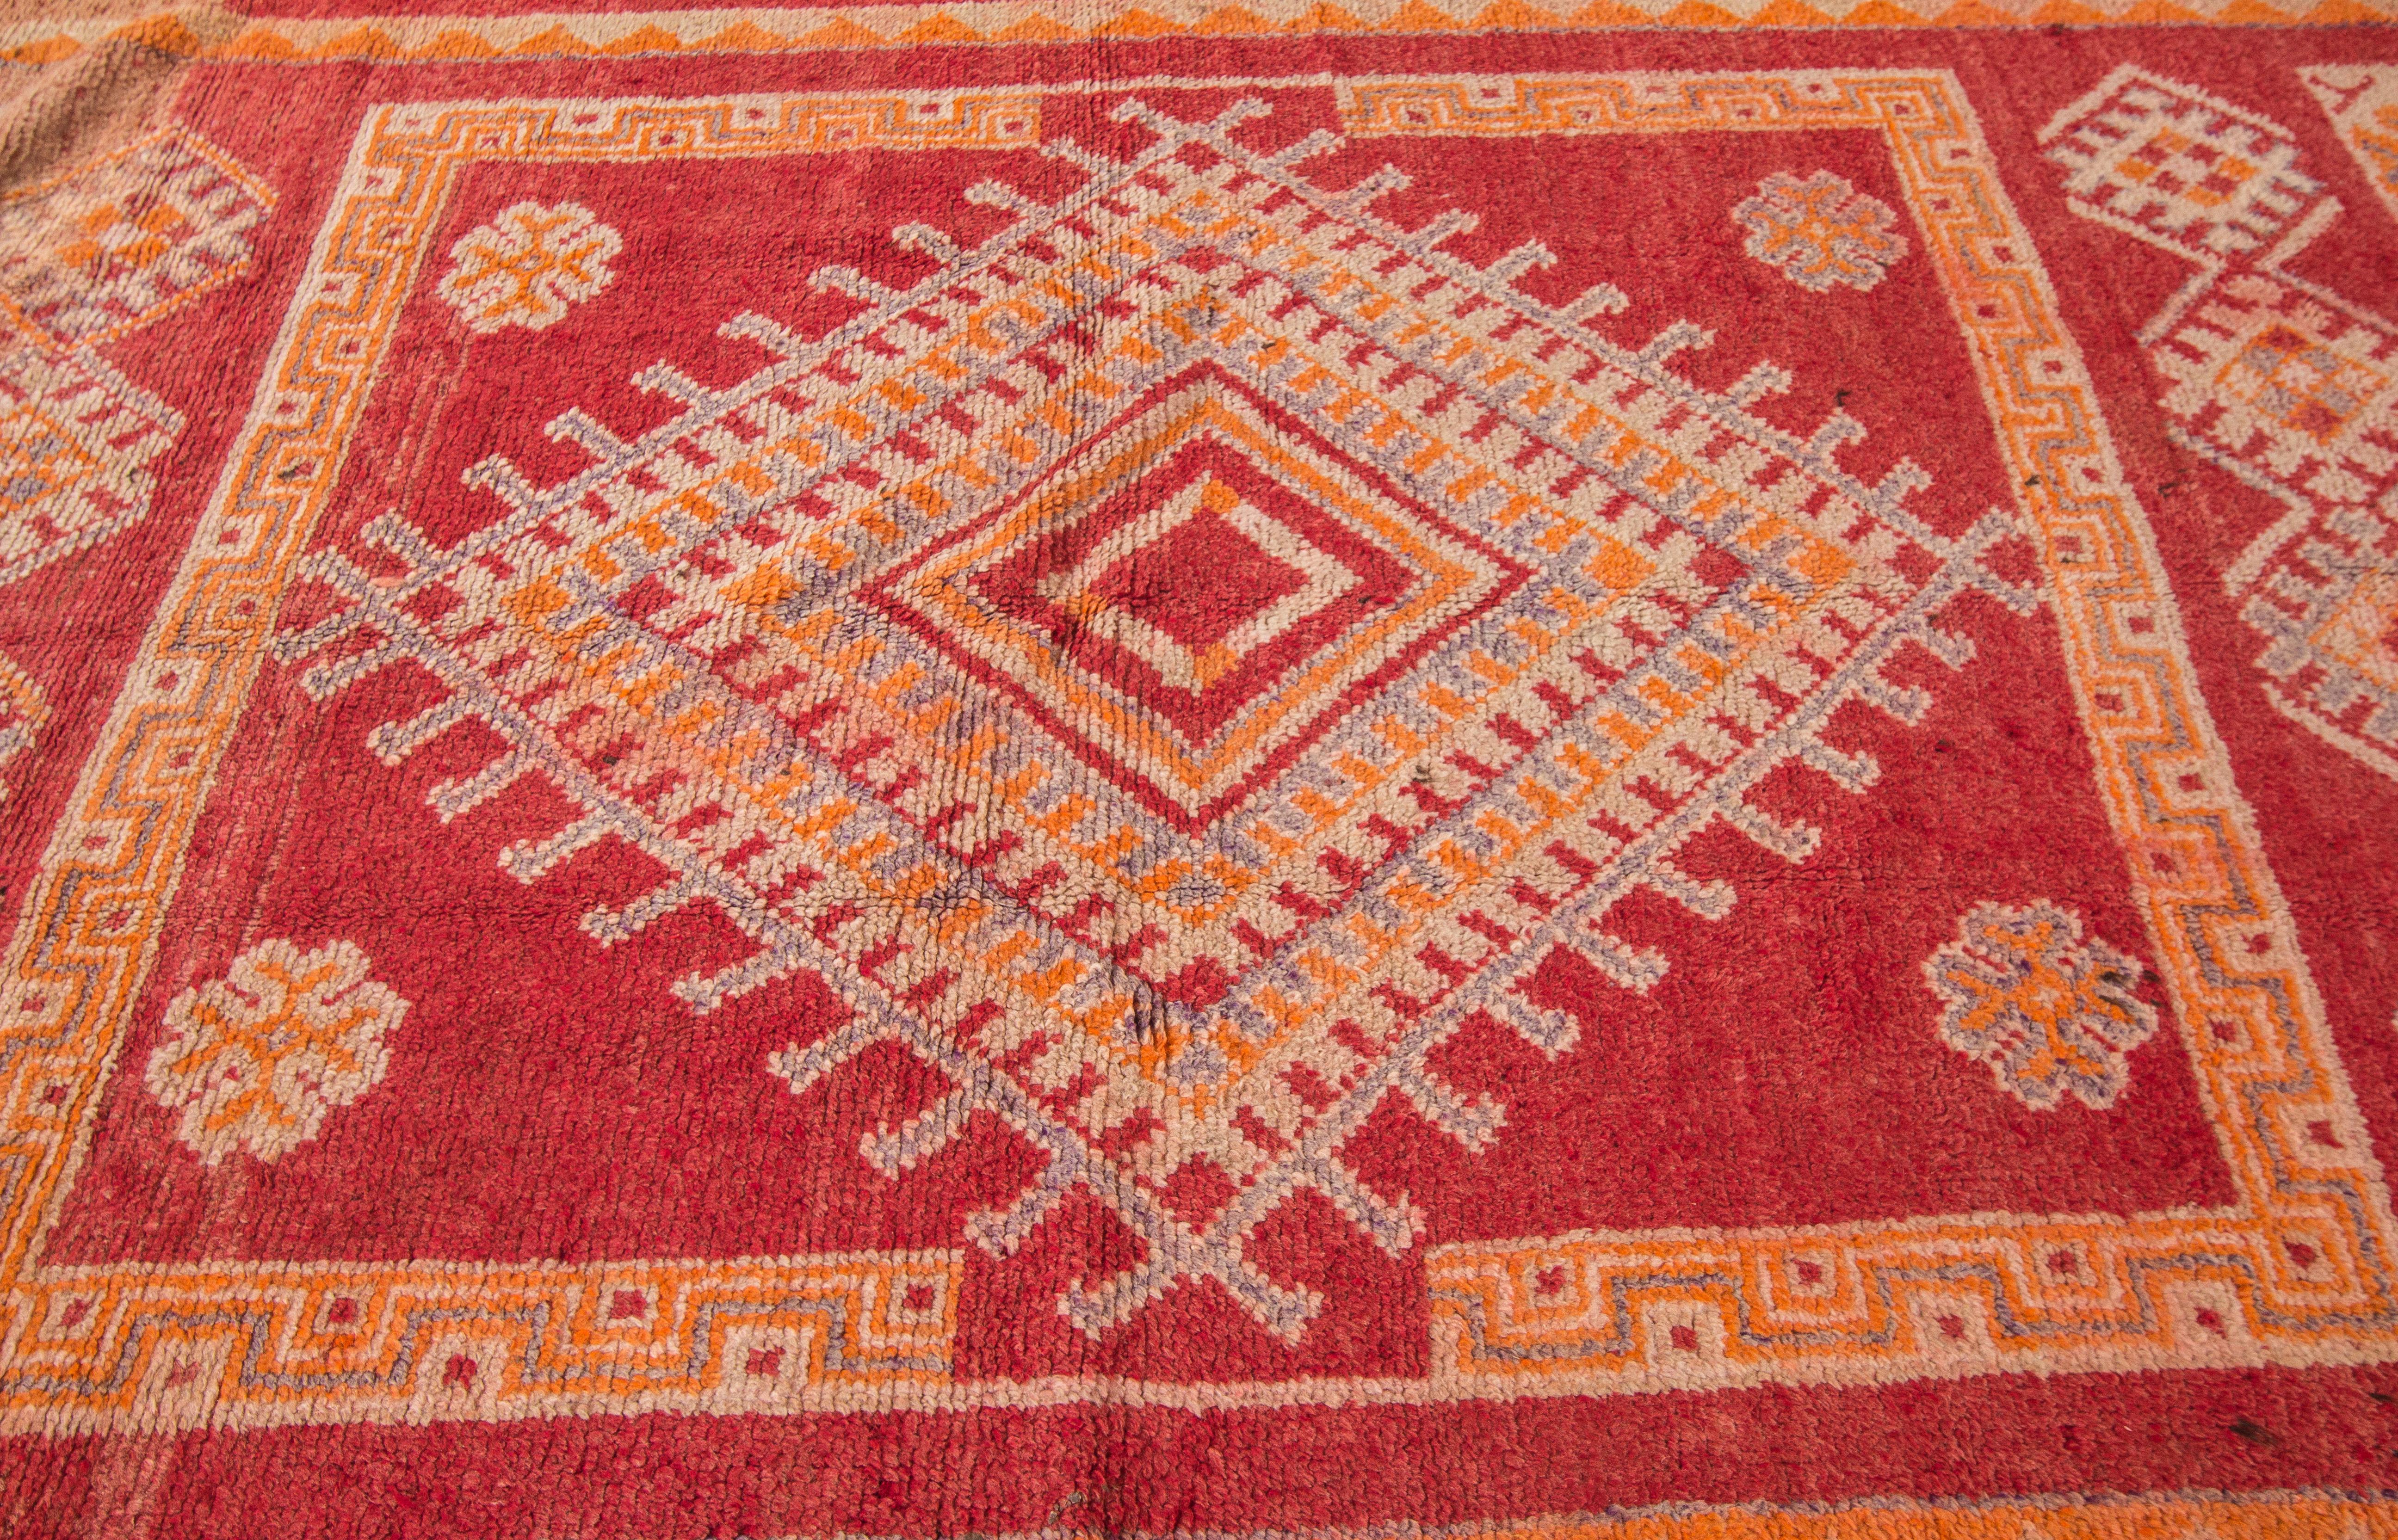 Vintage 1940s Red and Orange Moroccan Rug, 5.10x13.02 In Excellent Condition For Sale In Norwalk, CT